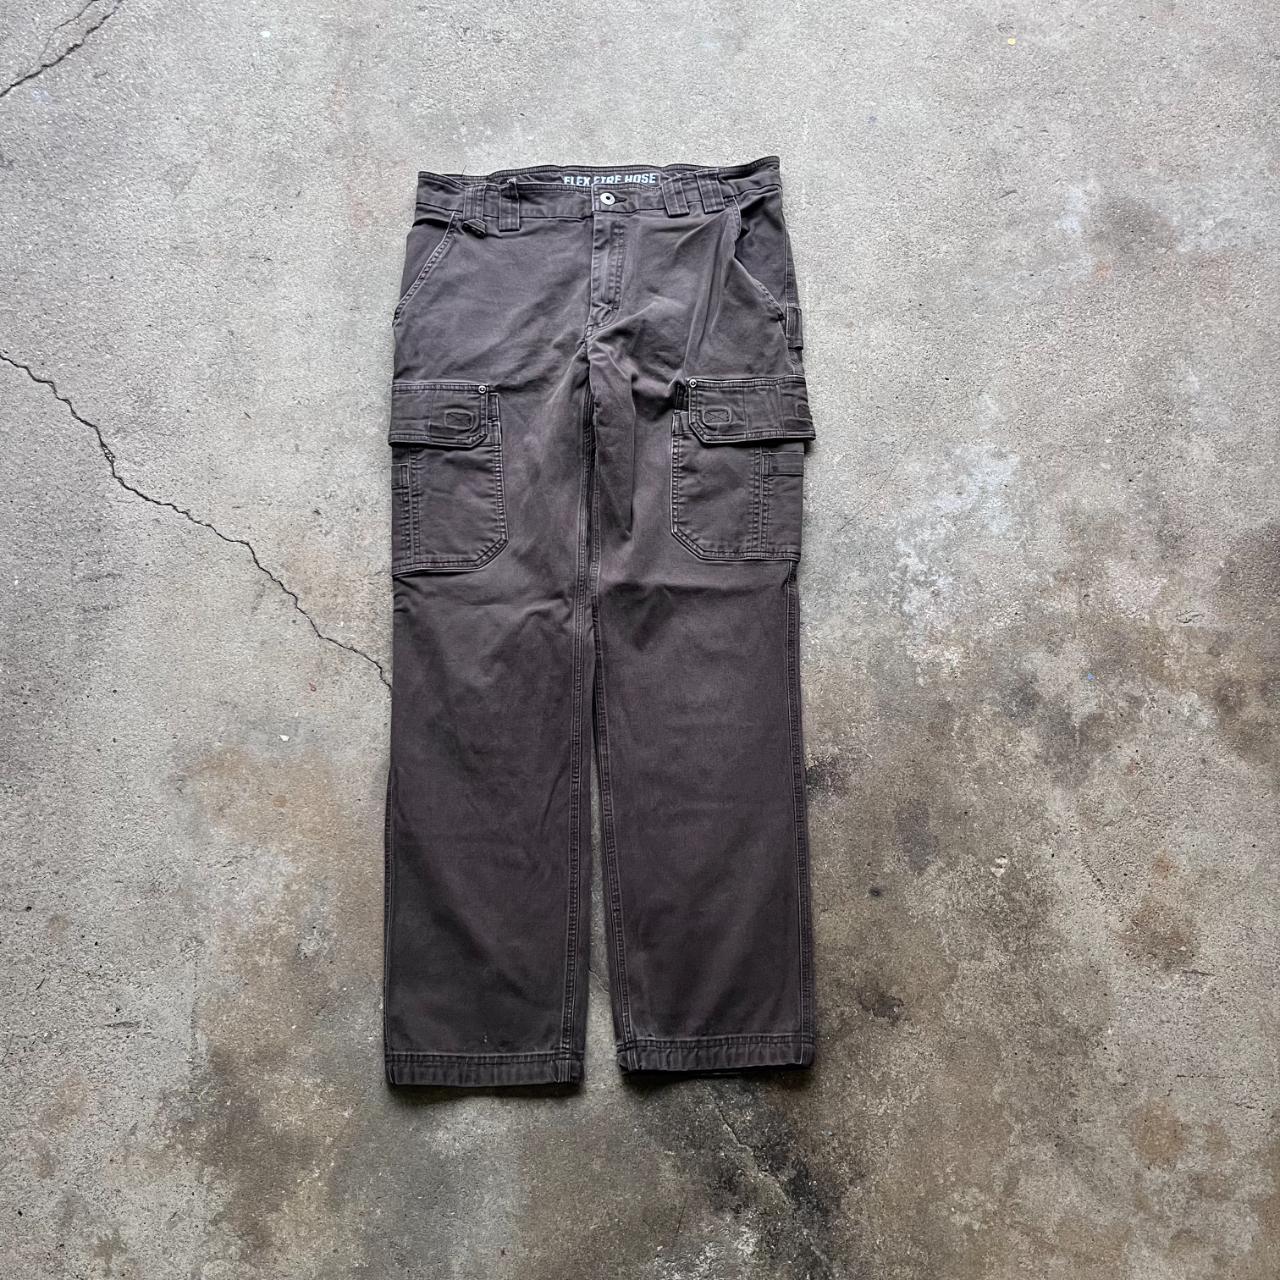 Duluth Trading Company Brown Cargo Pants [34 x 34]